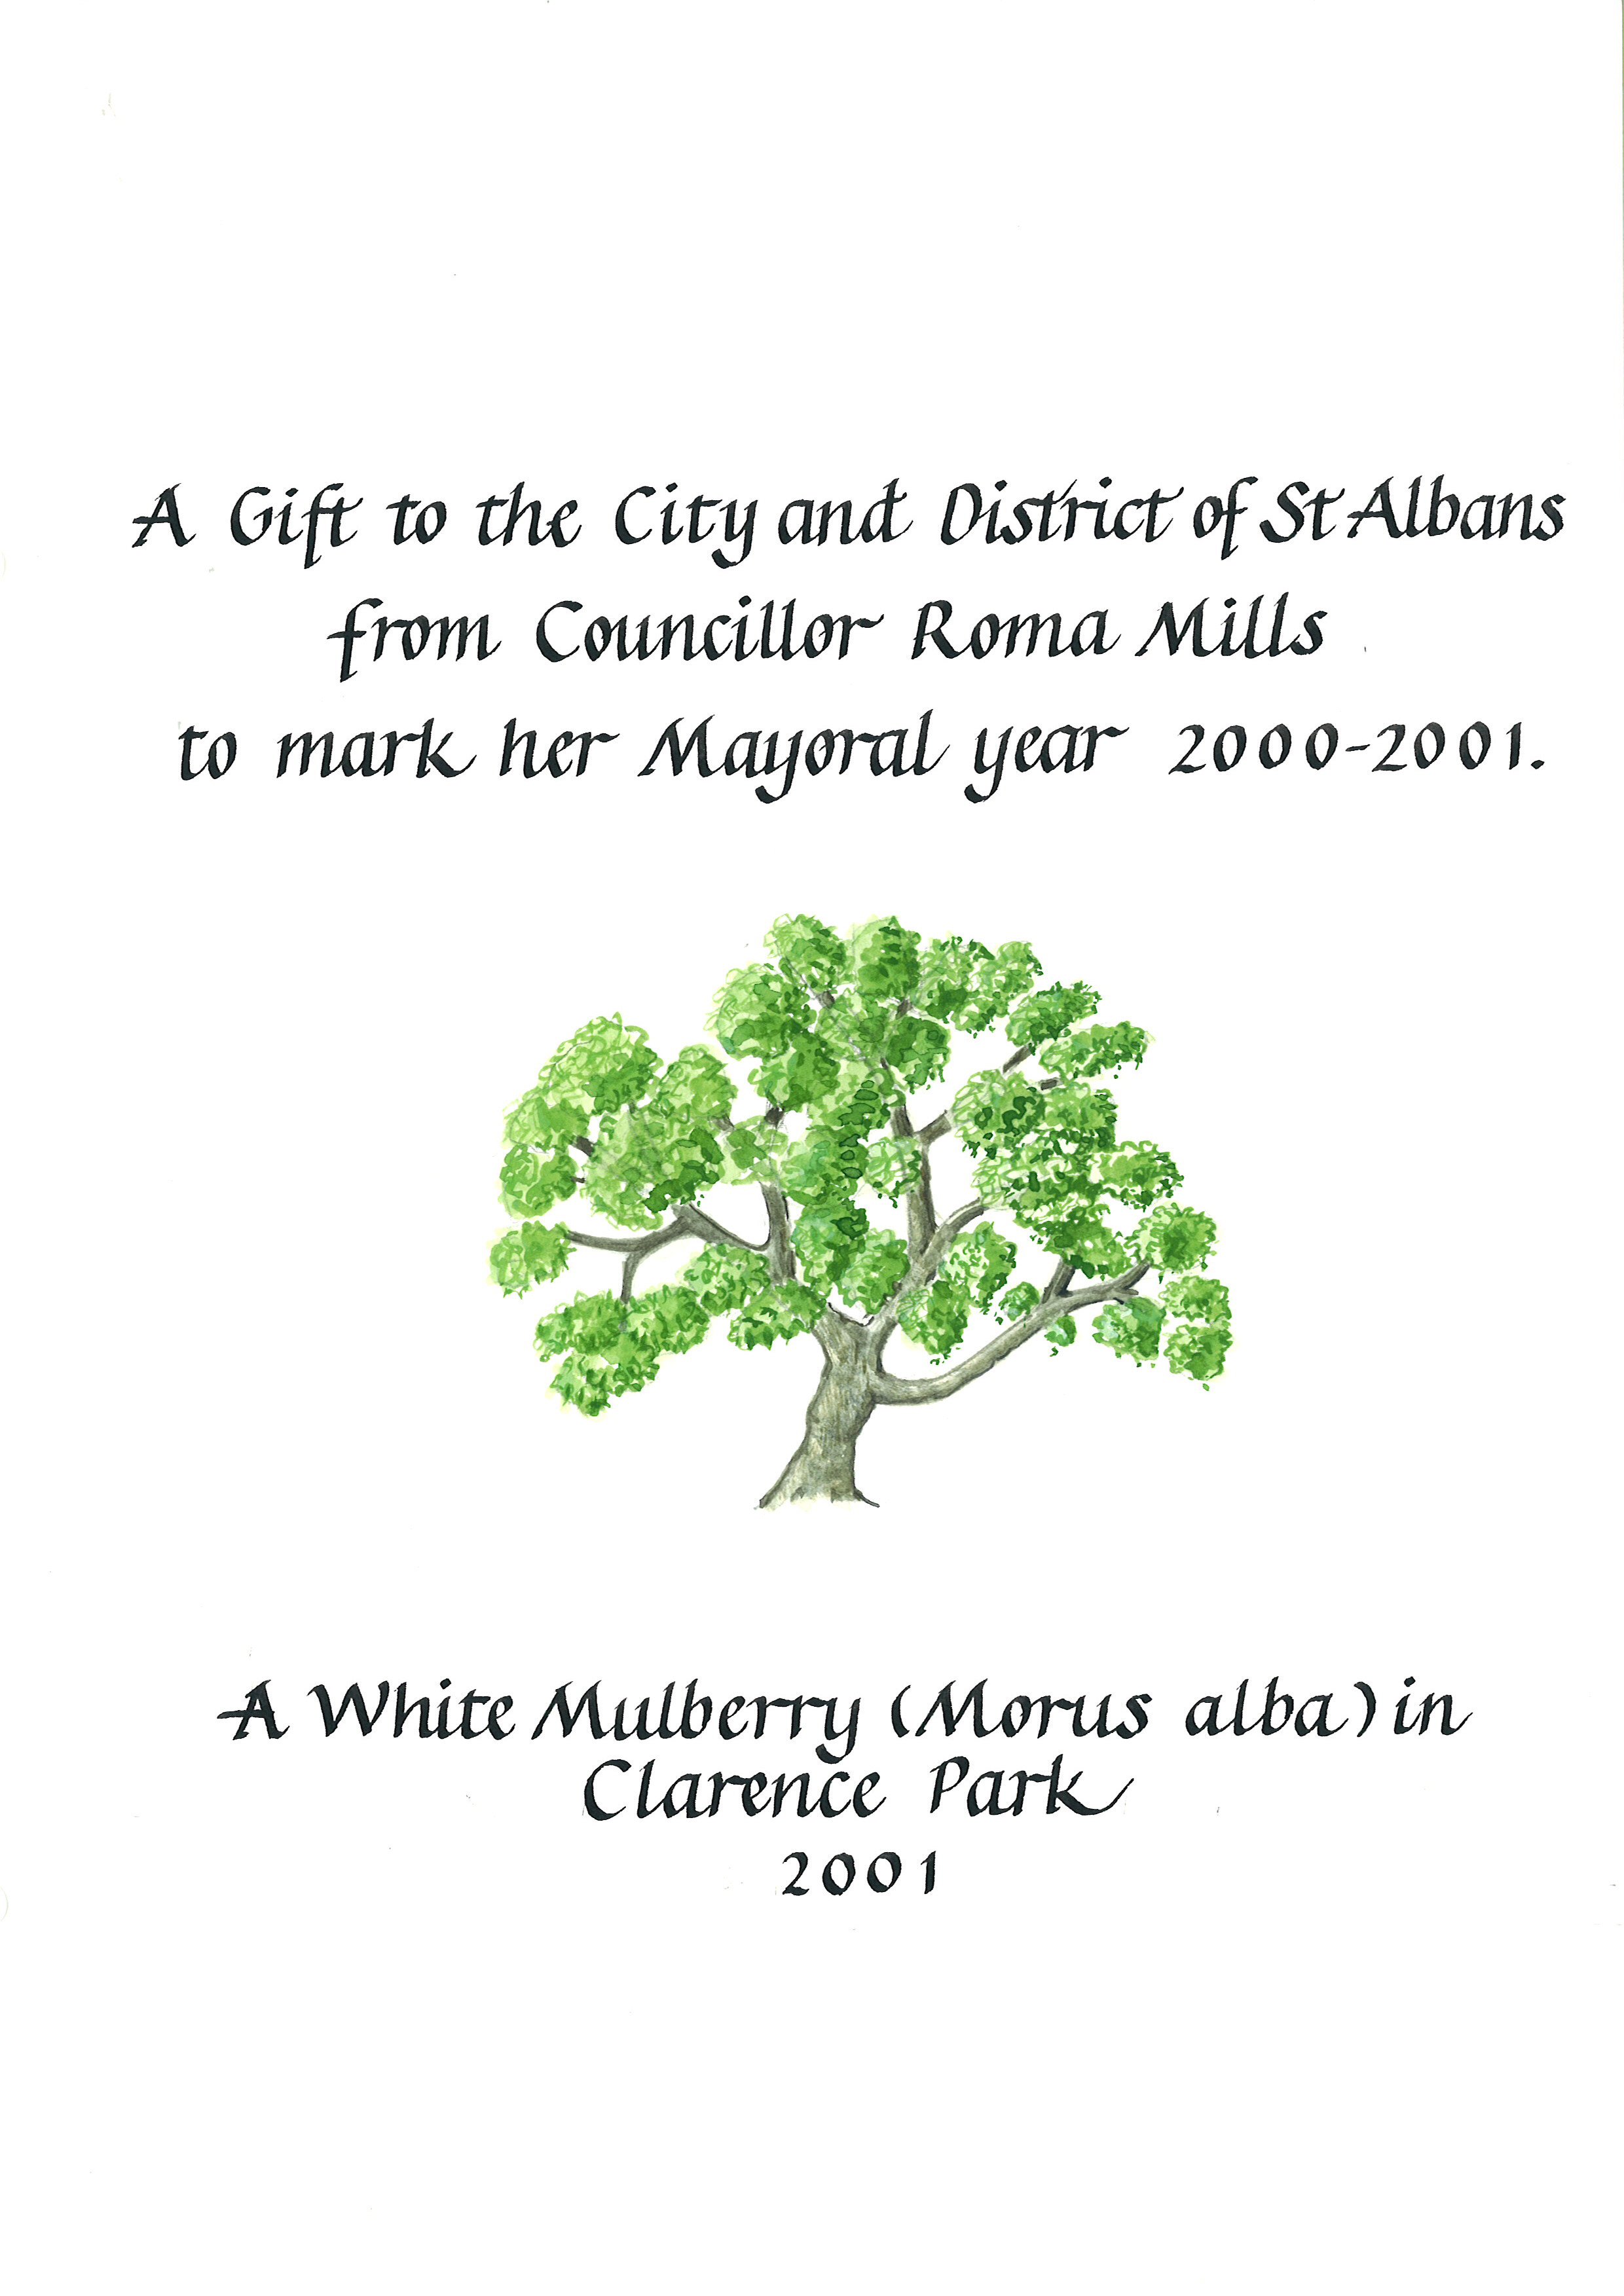 Cllr Roma Mills for her mayoral year 2000-1 -- Clarence Park webpage 100